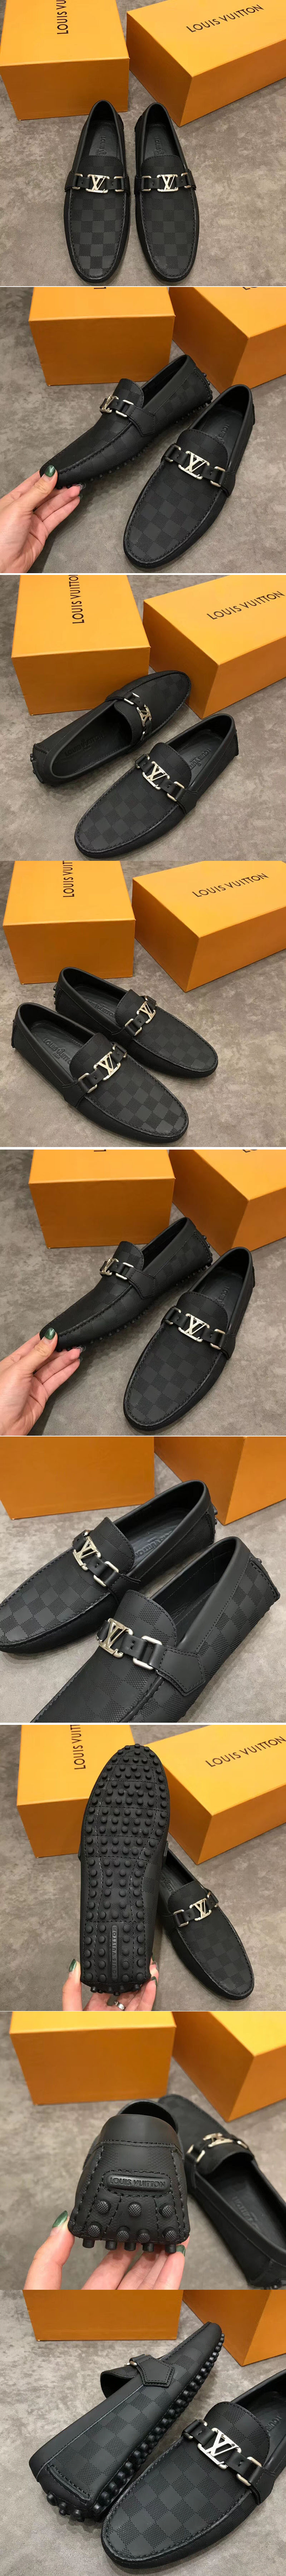 Replica Louis Vuitton LV Hockenheim Loafer And Shoes Damier Embossed Calf leather Black